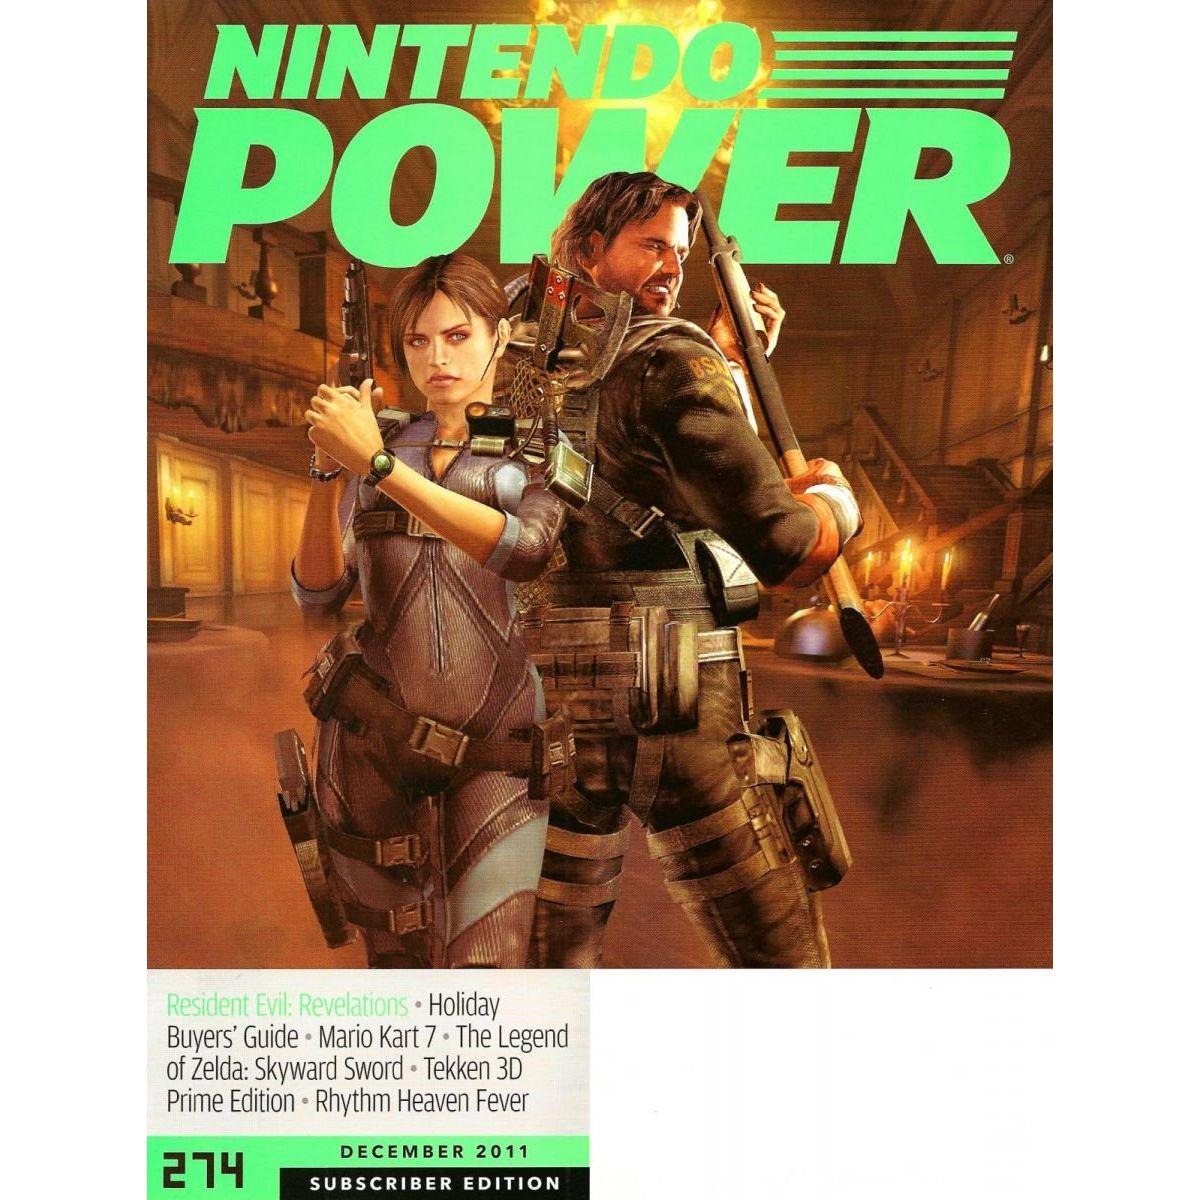 Nintendo Power Magazine (#274 Subscriber Edition) - Complete and/or Good Condition